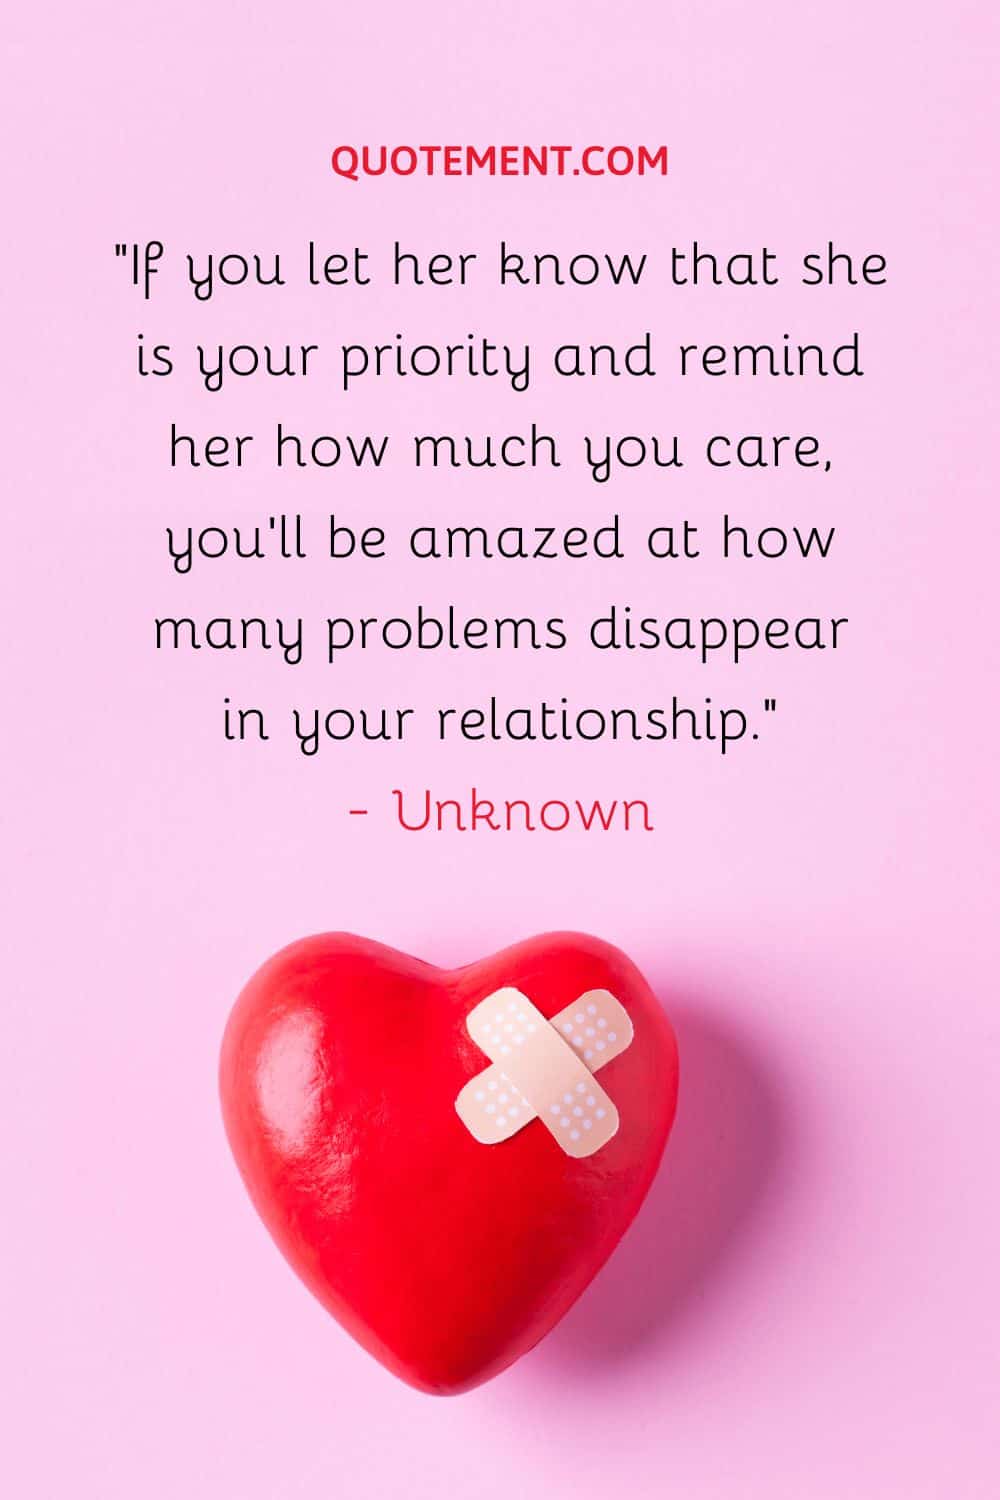 If you let her know that she is your priority and remind her how much you care, you’ll be amazed at how many problems disappear in your relationship